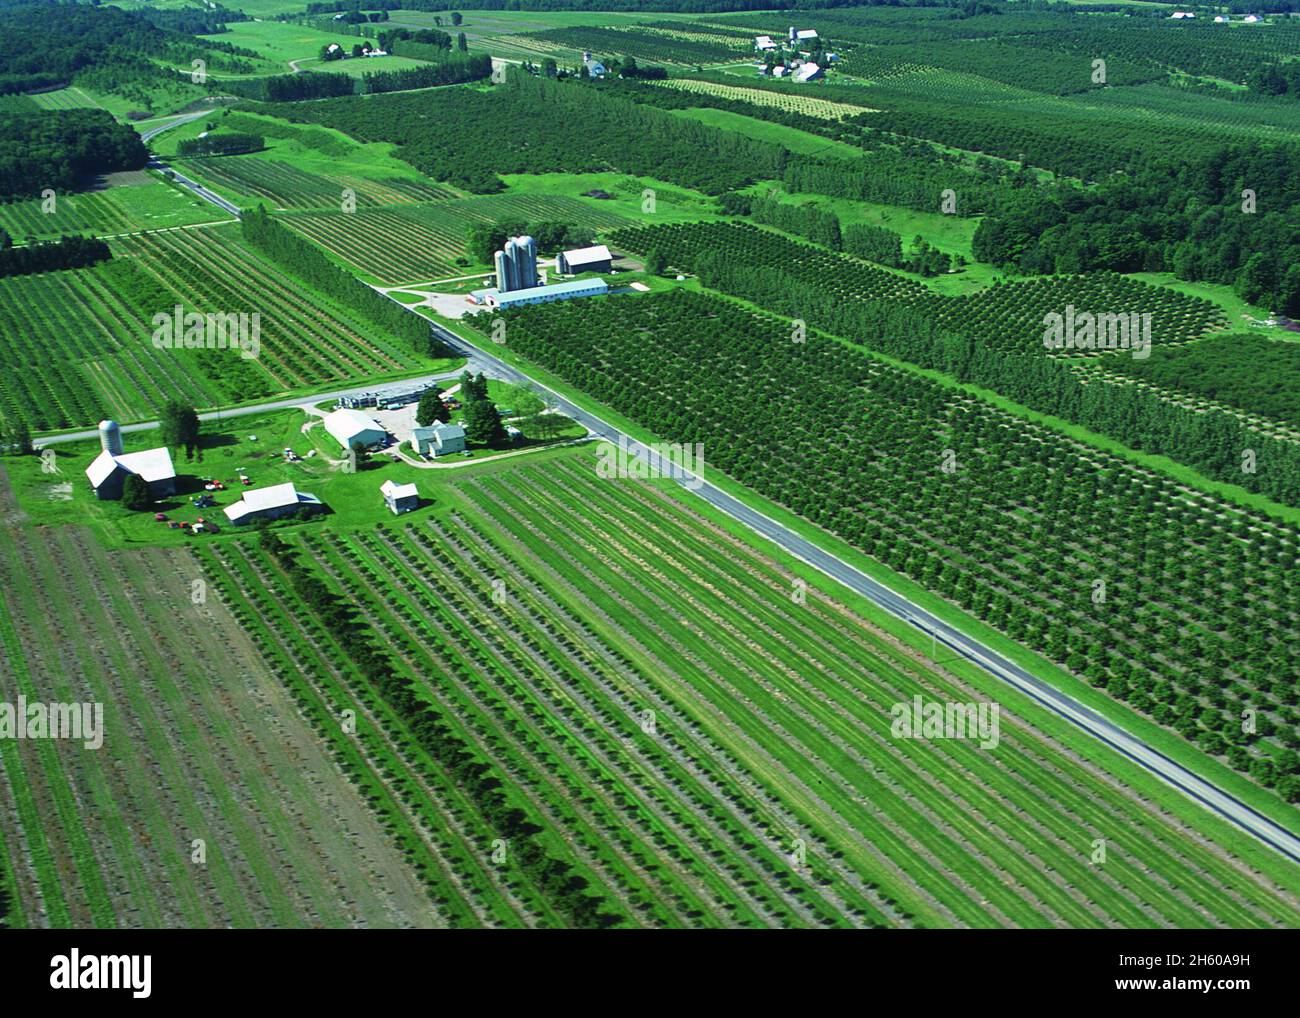 Aerial view of orchards and vineyards.  Grand Traverse County, Michigan ca. 2011 or earlier Stock Photo